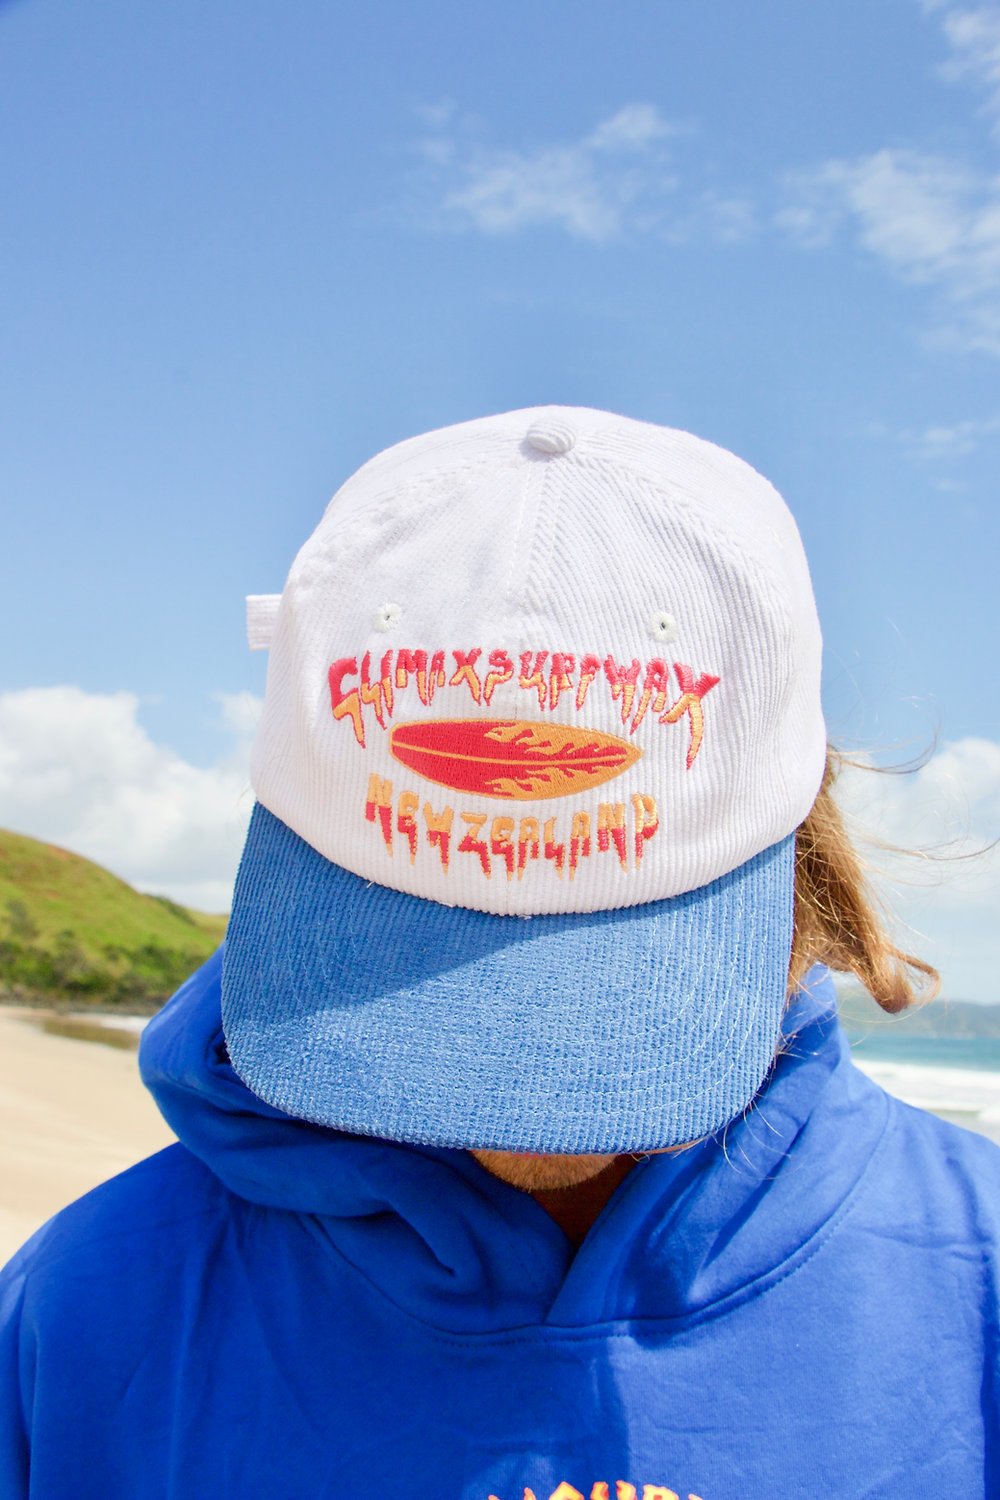 New Zealand Corduroy Cap by Climax Surf — Ethically So.